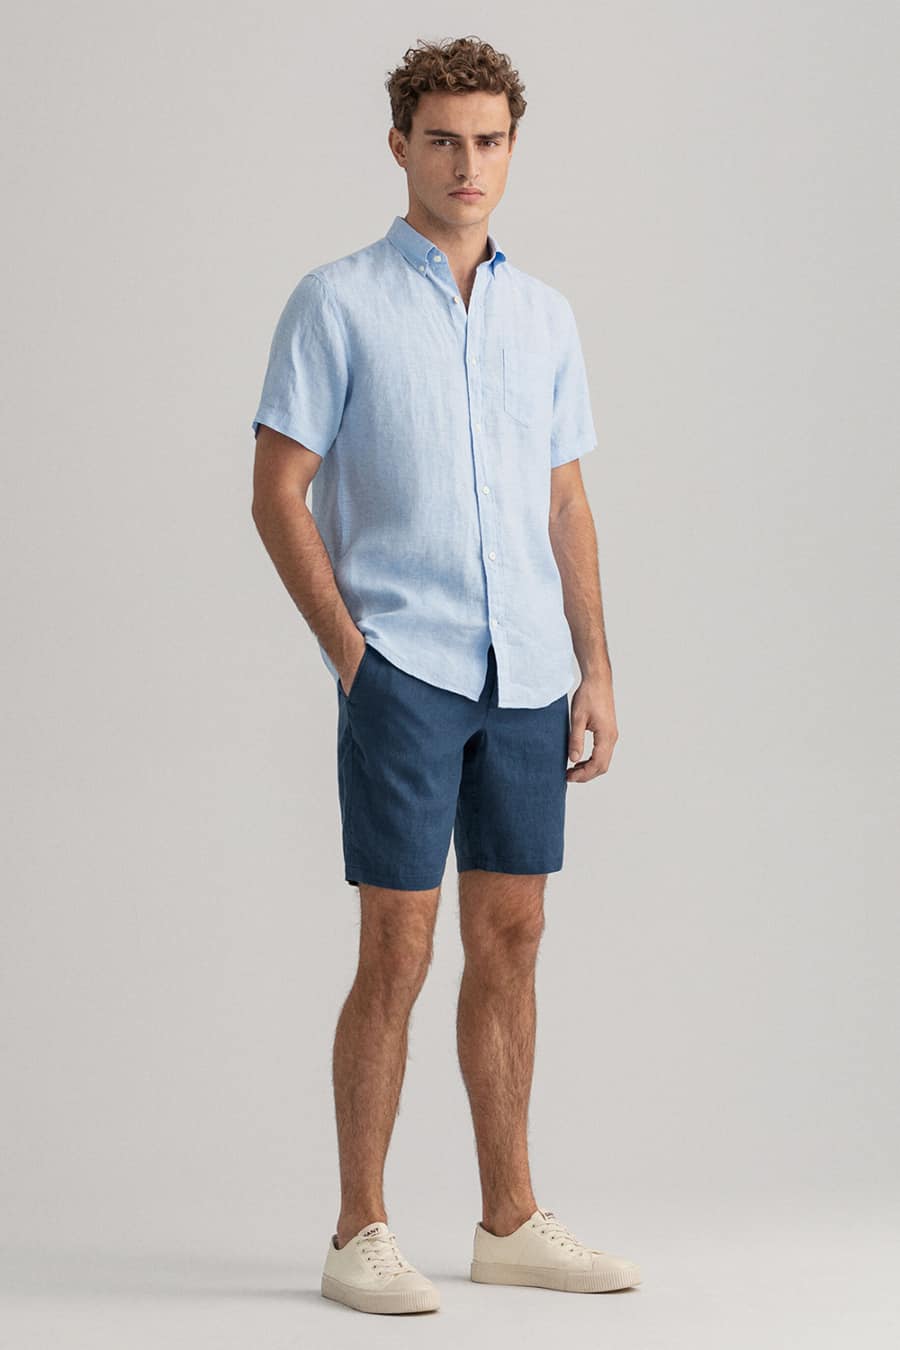 Men's short slevee button down shirt, shorts and sneakers outfit for men